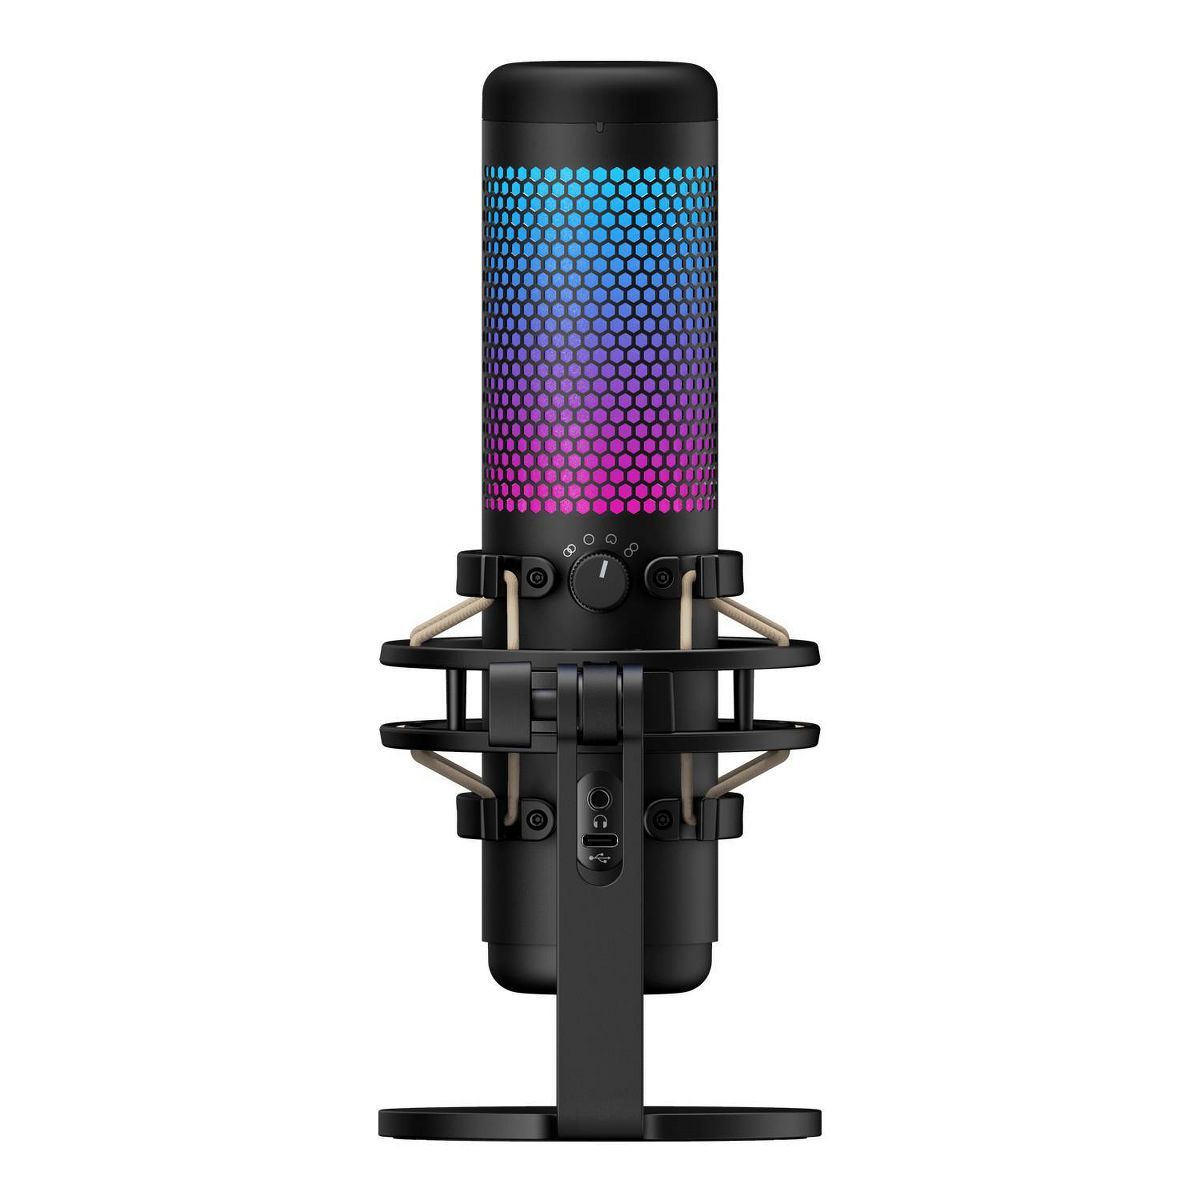 HyperX QuadCast S RGB USB Condenser Microphone for PC/PlayStation 4 | Target